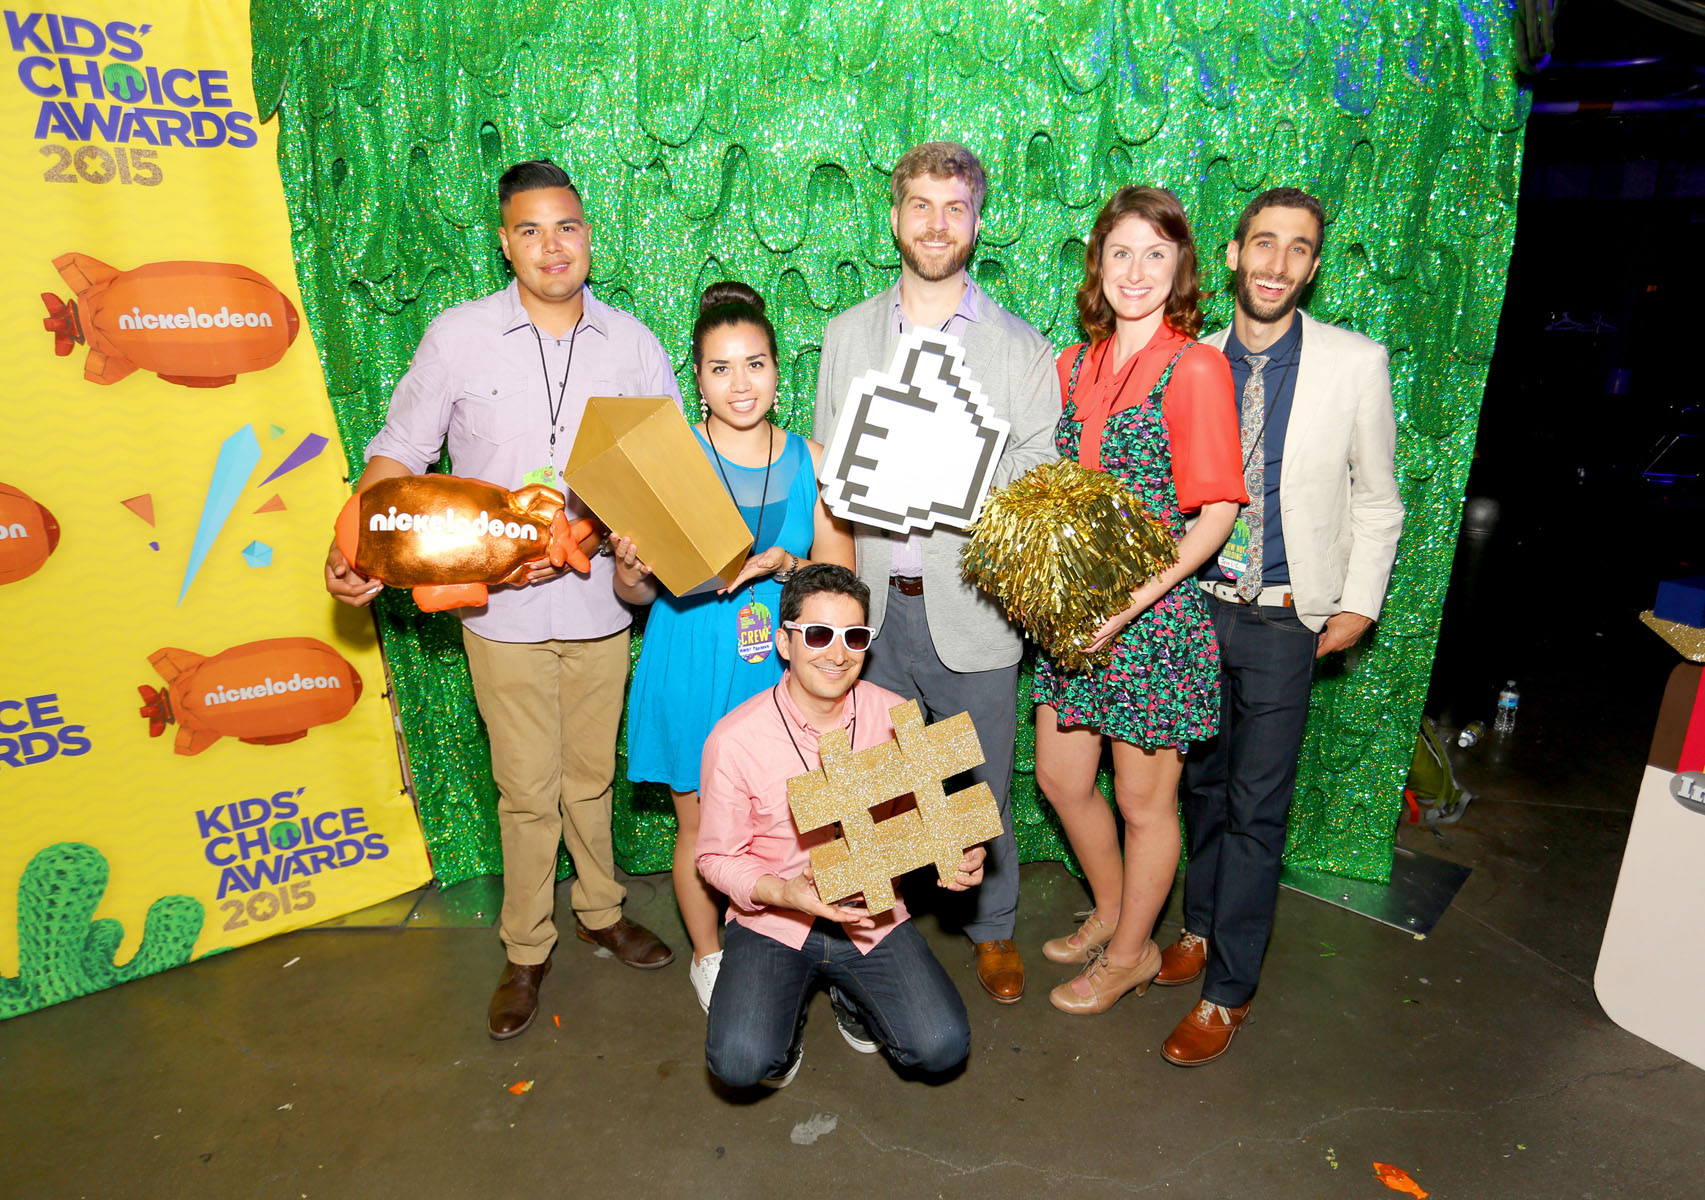 The Nickelodeon social content team backstage at the Kids' Choice Awards 2015